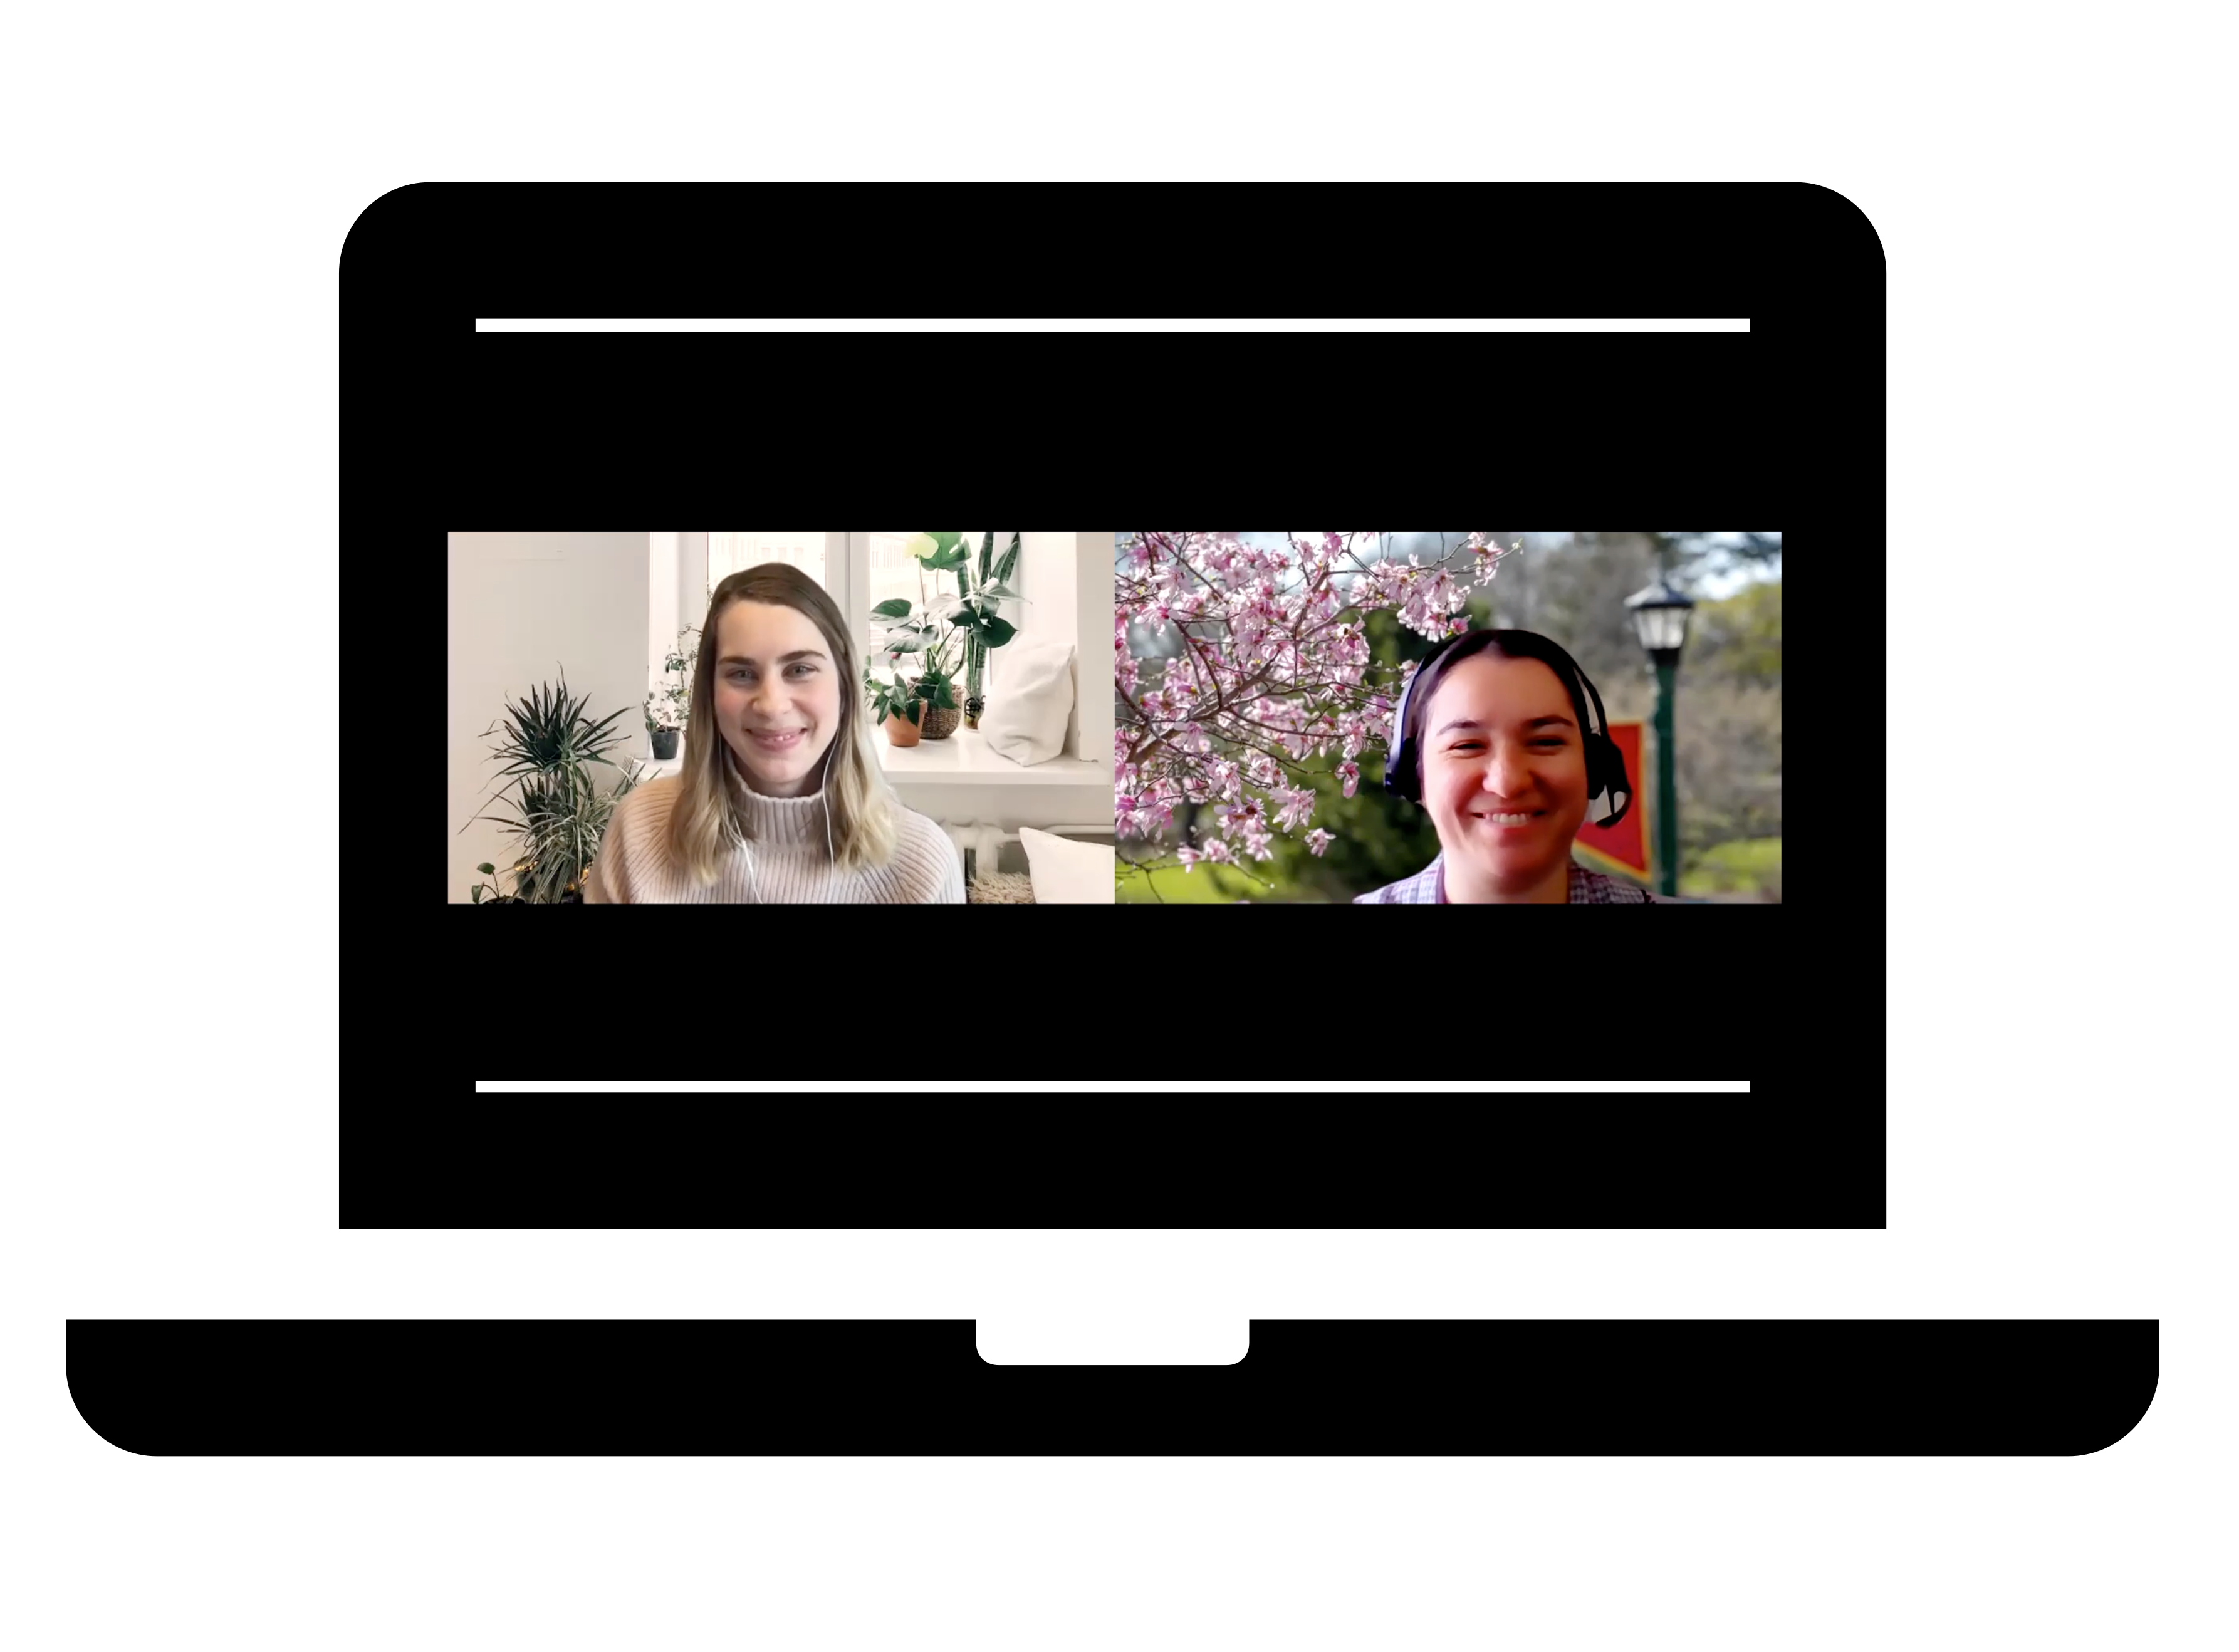 An image of a laptop showing a Zoom call with Sharolyn and Jenna